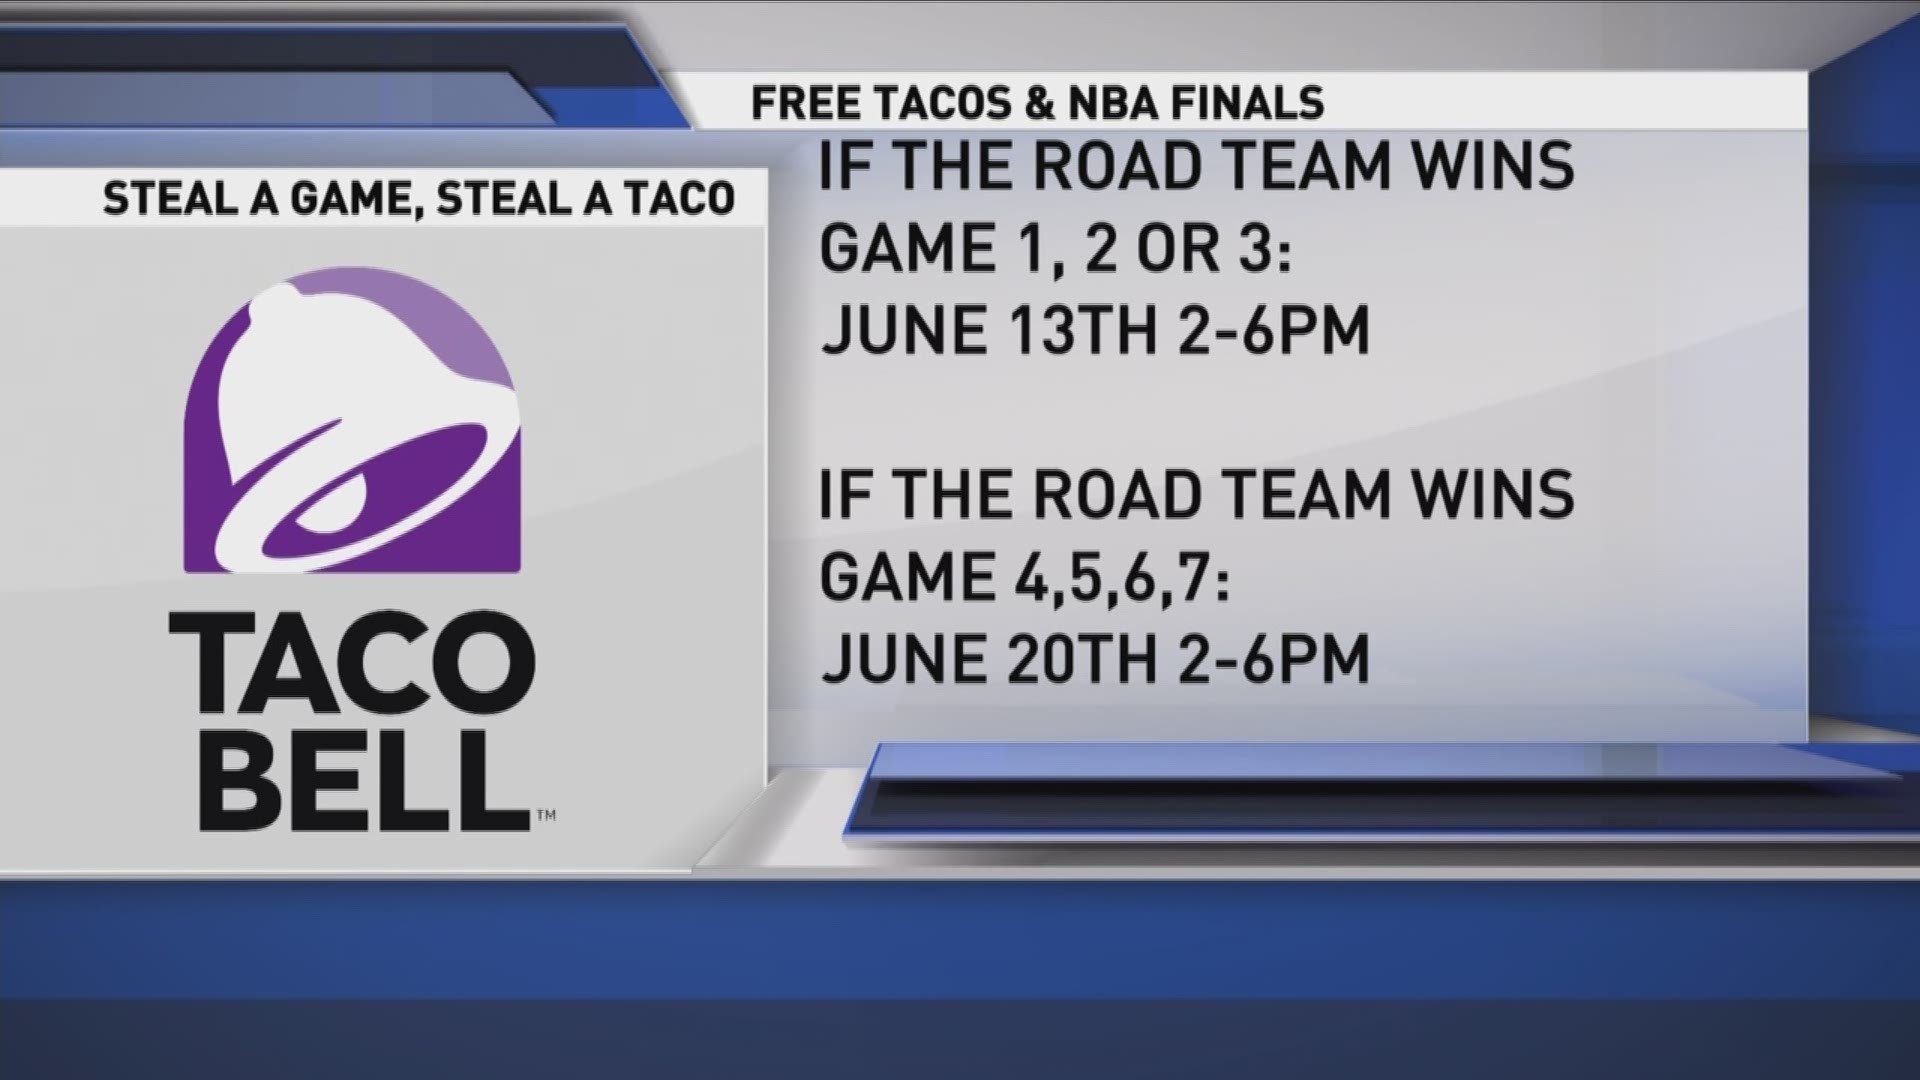 Is The Free Taco Bell For Real??